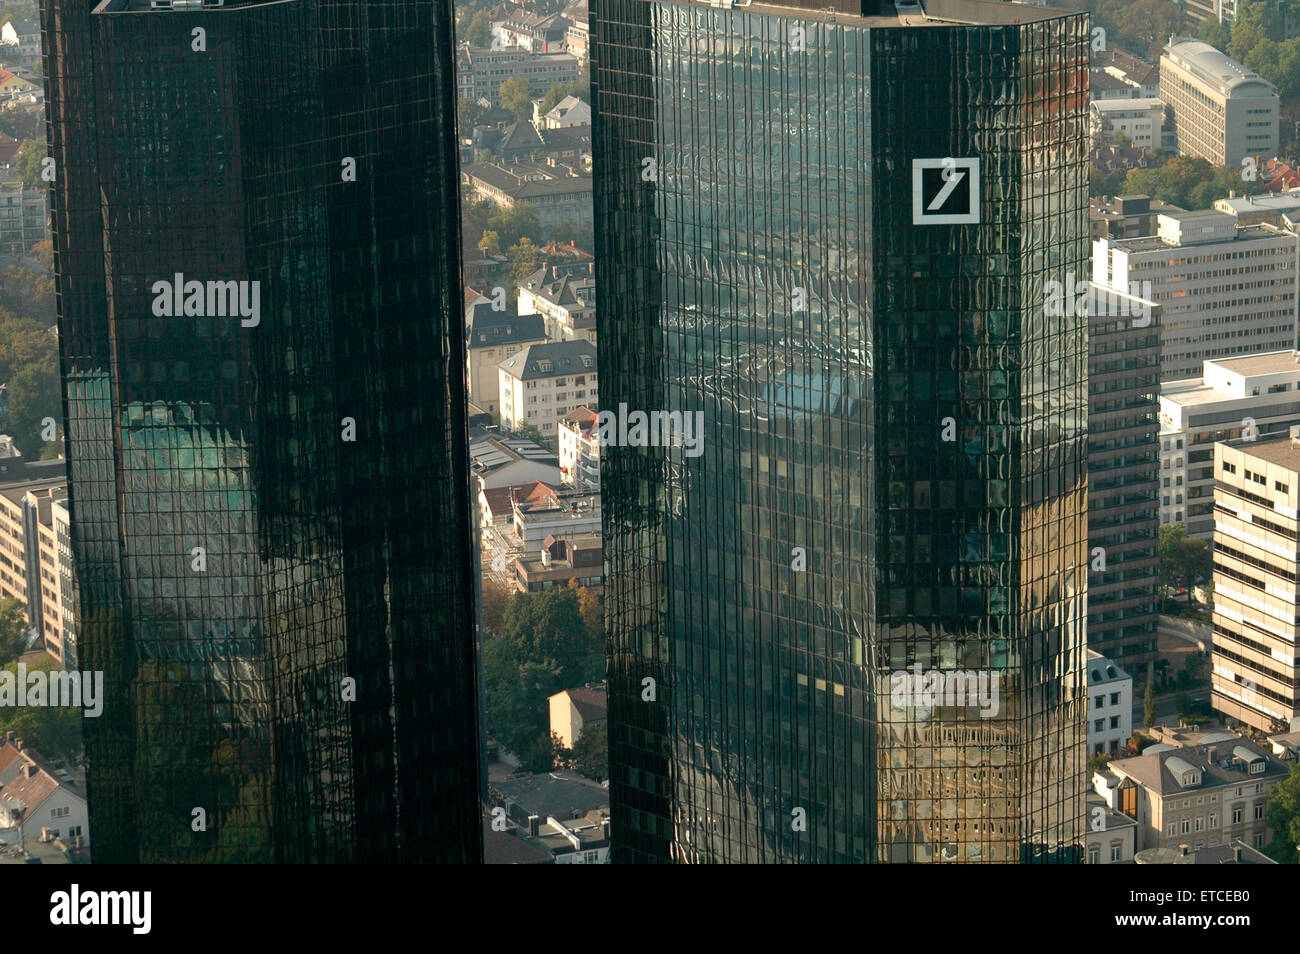 Deutsche Bank Frankfurt High Resolution Stock Photography and Images - Alamy